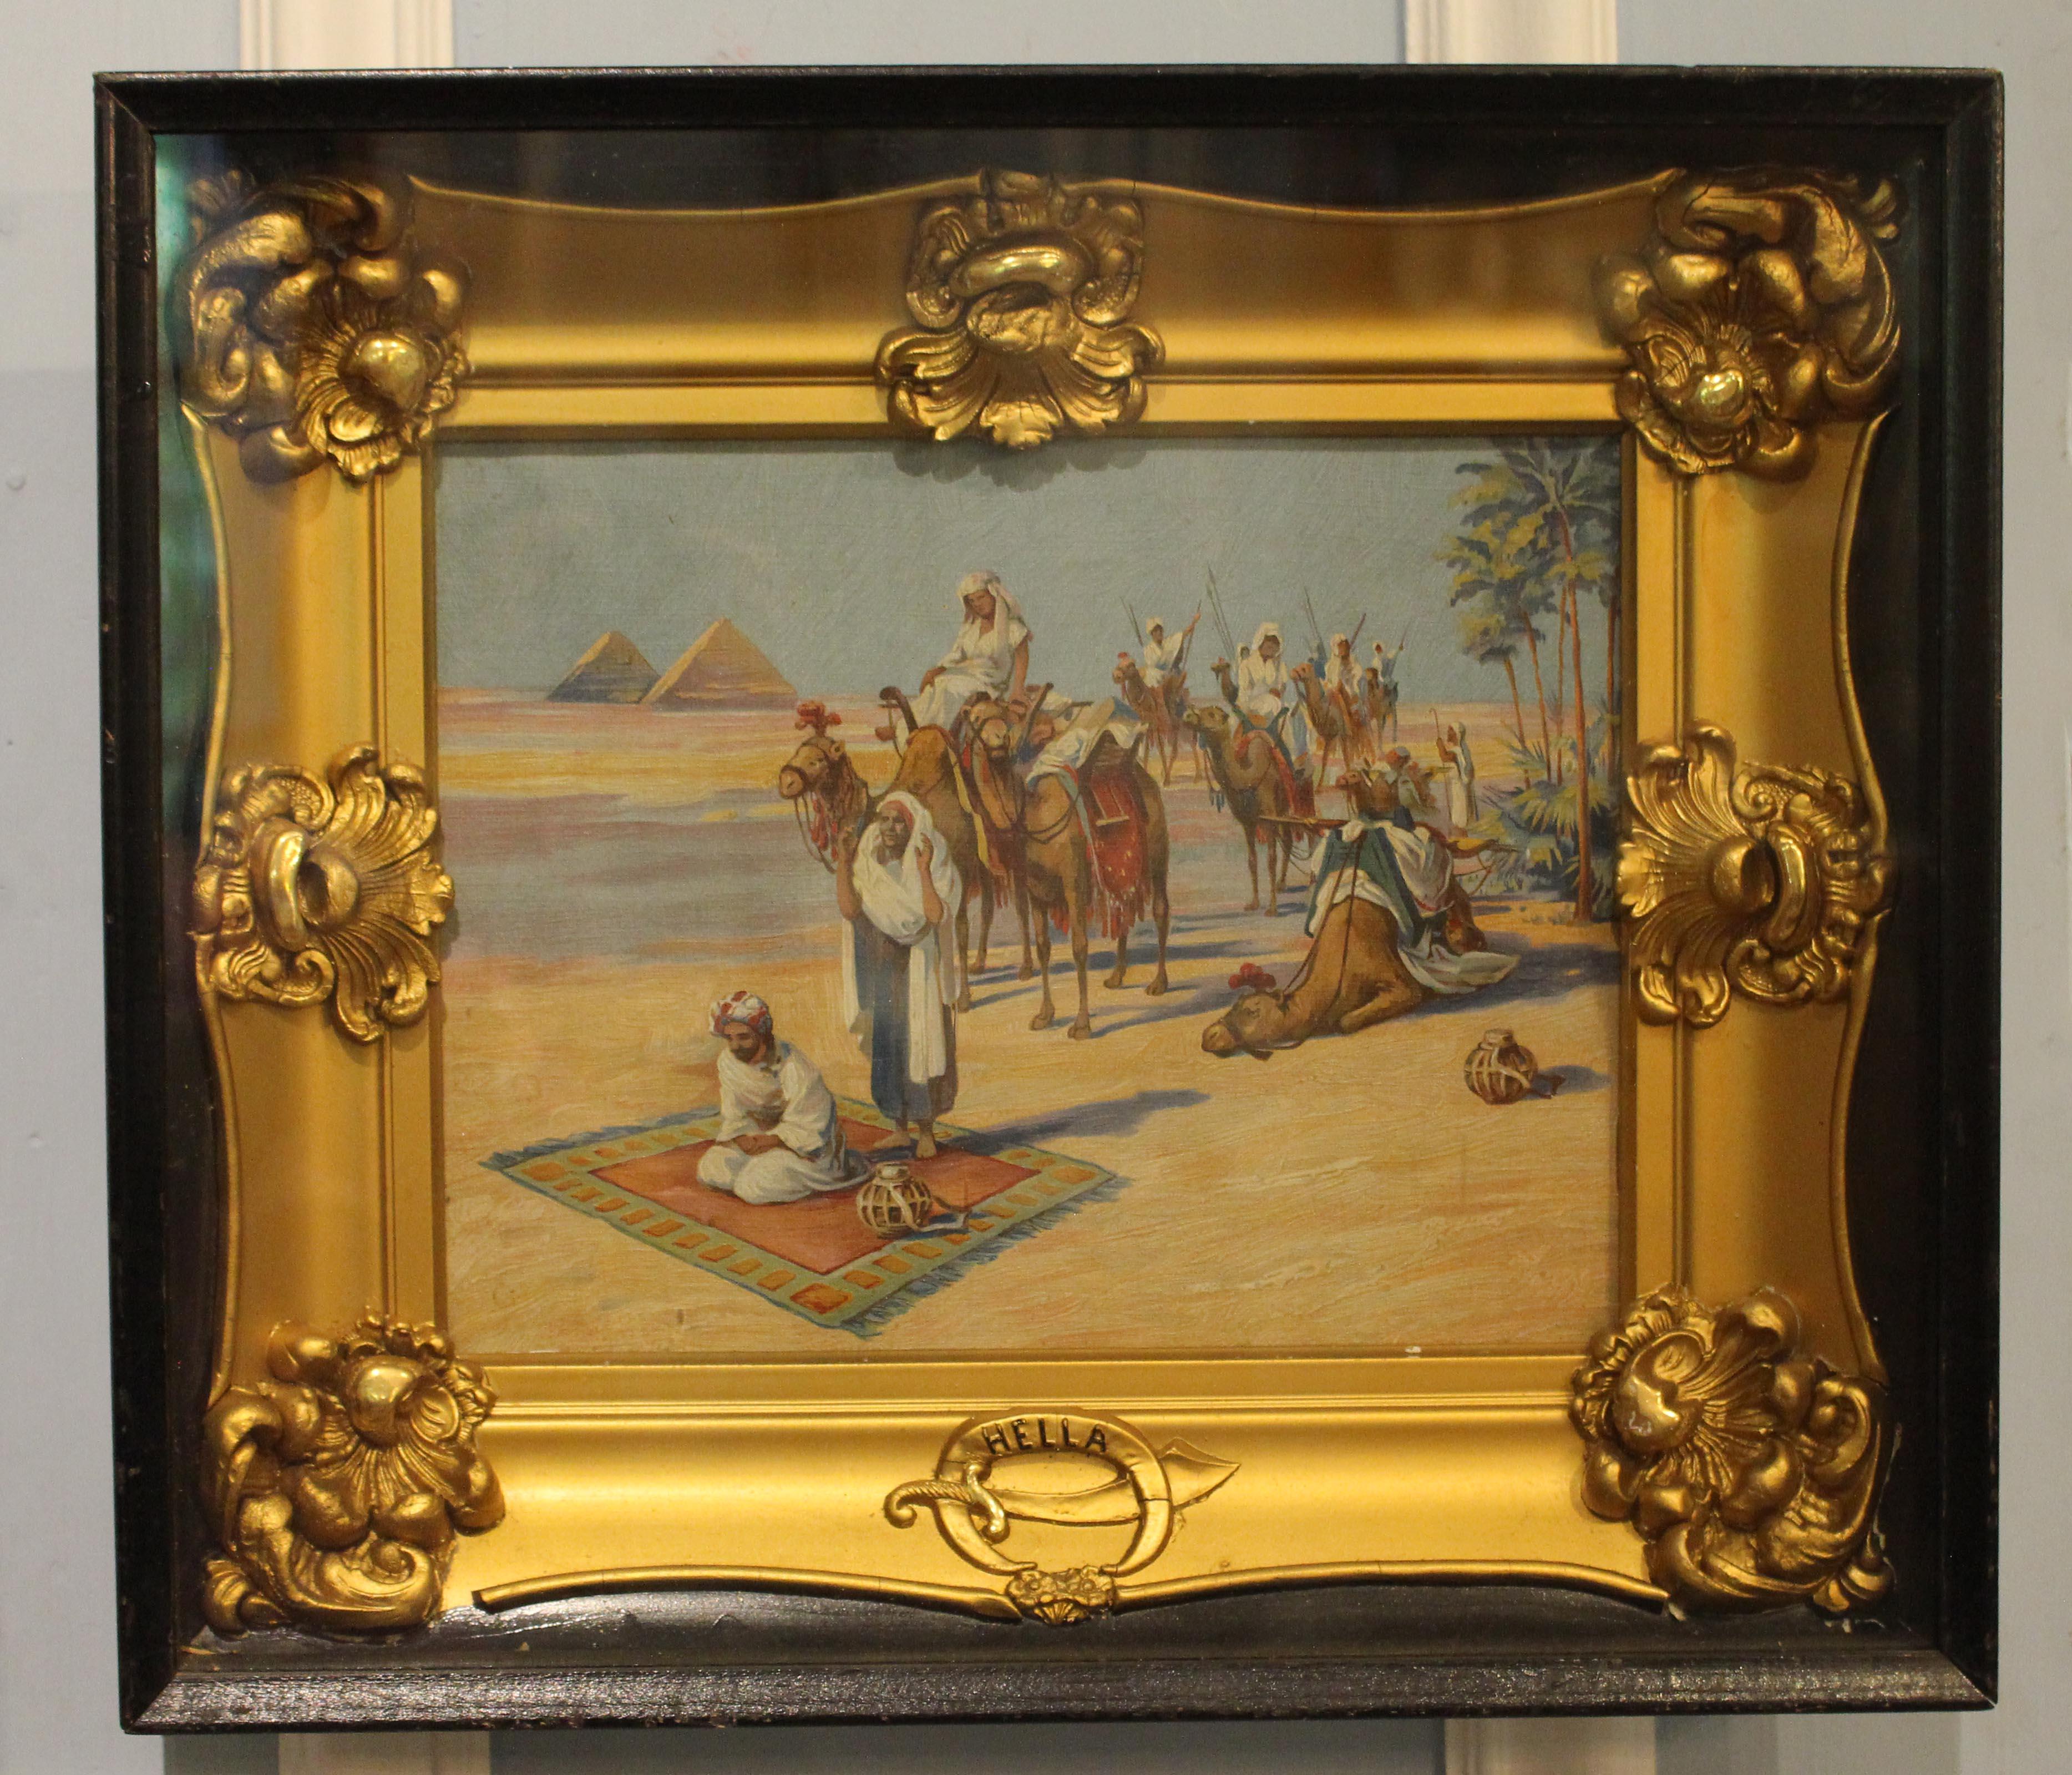 A late 19th century oil print in shadowbox frame, a Grand Tour souvenir. Orientalist scene with camel & pyramids, in gilt inner frame. Incredibly decorative & fun - made as a souvenir for gentry on the Grand Tour, likely sold as an oil